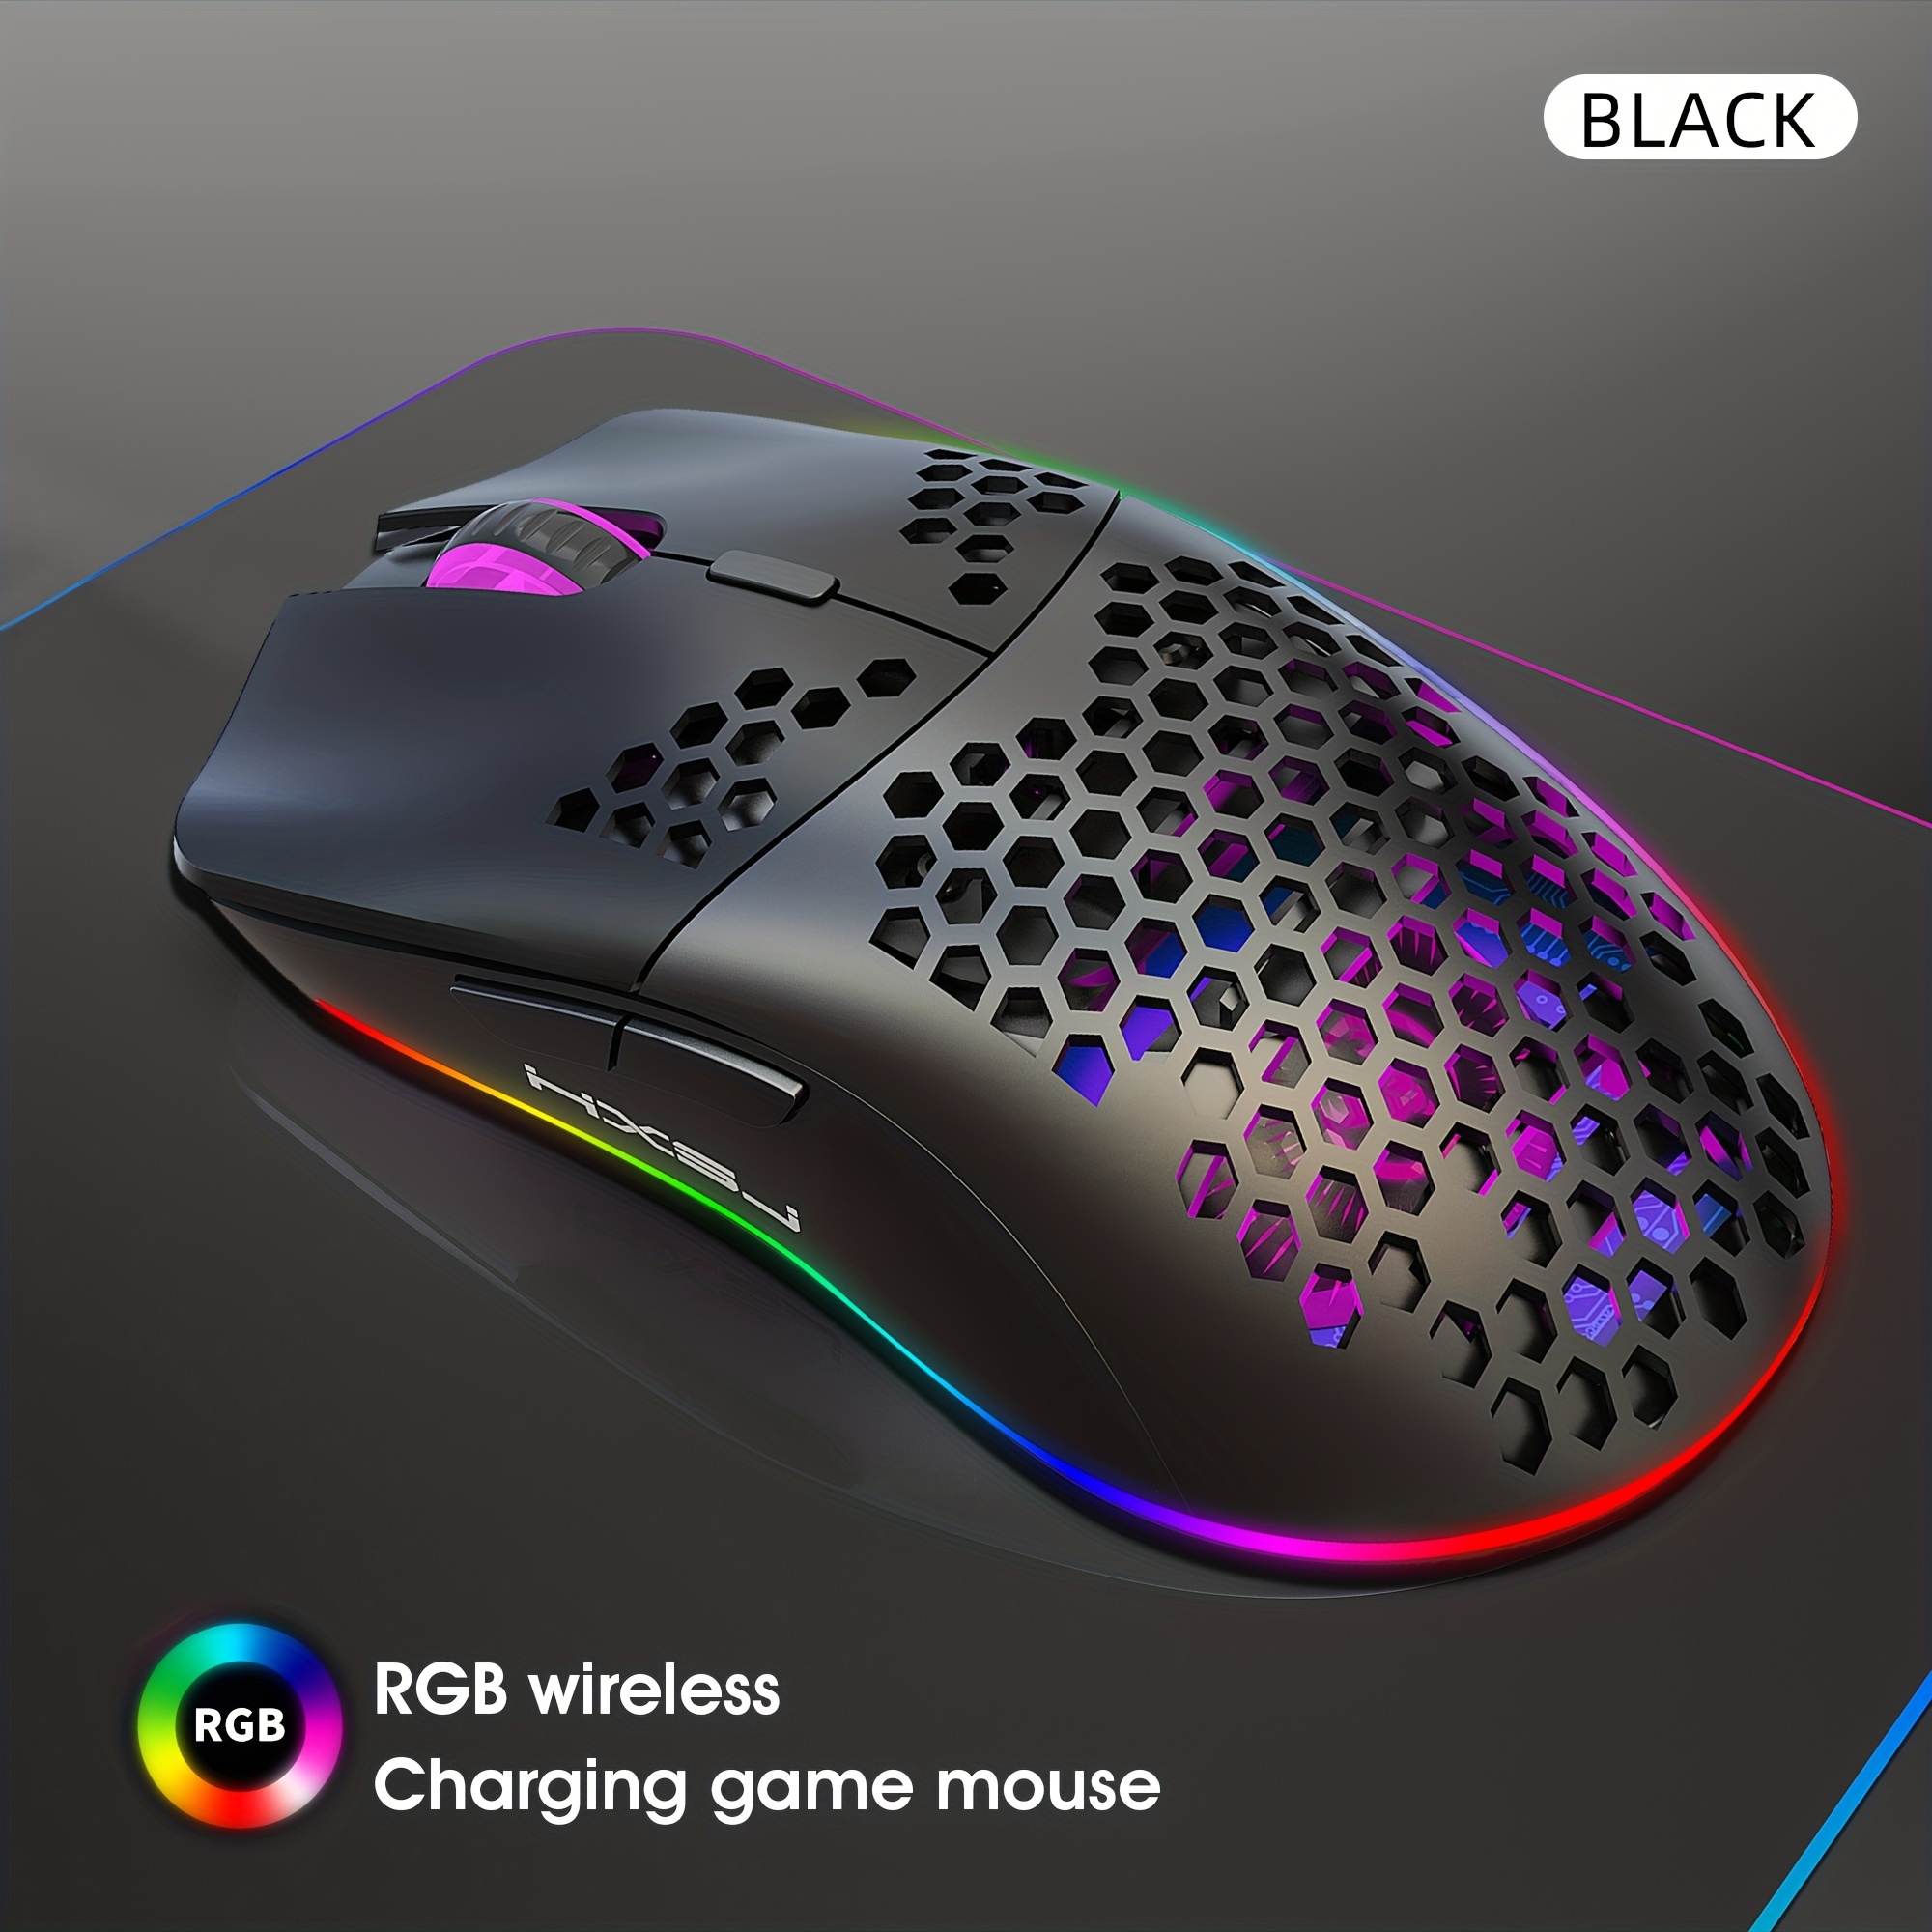  RGB Wireless Gaming Mouse,Ultra-Lightweight Honeycomb